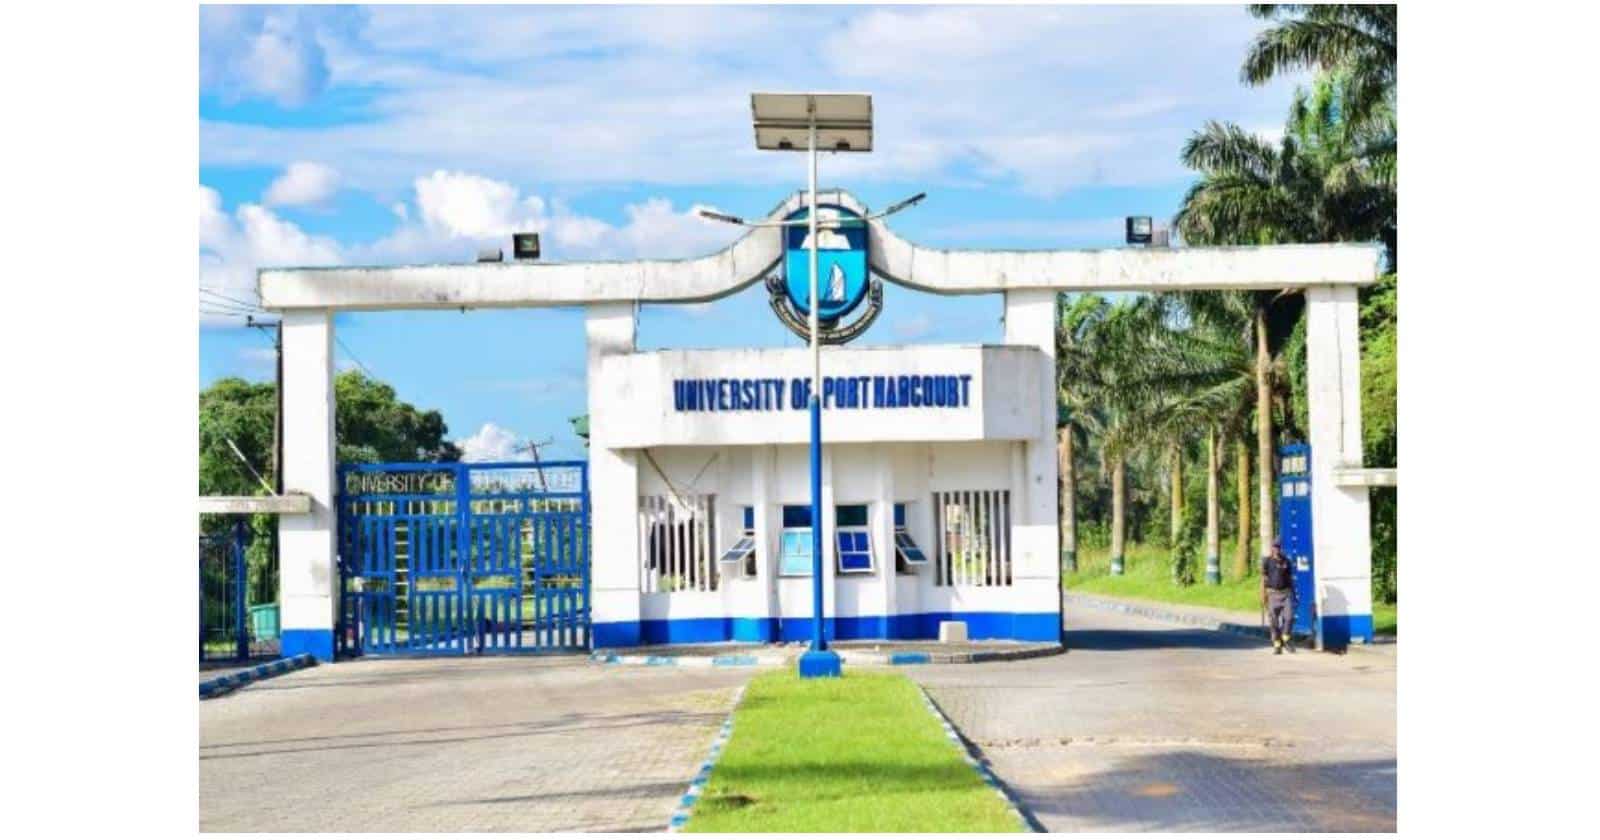 University of Port Harcourt (UNIPORT) CGCDS Admission Form for Graduate Students